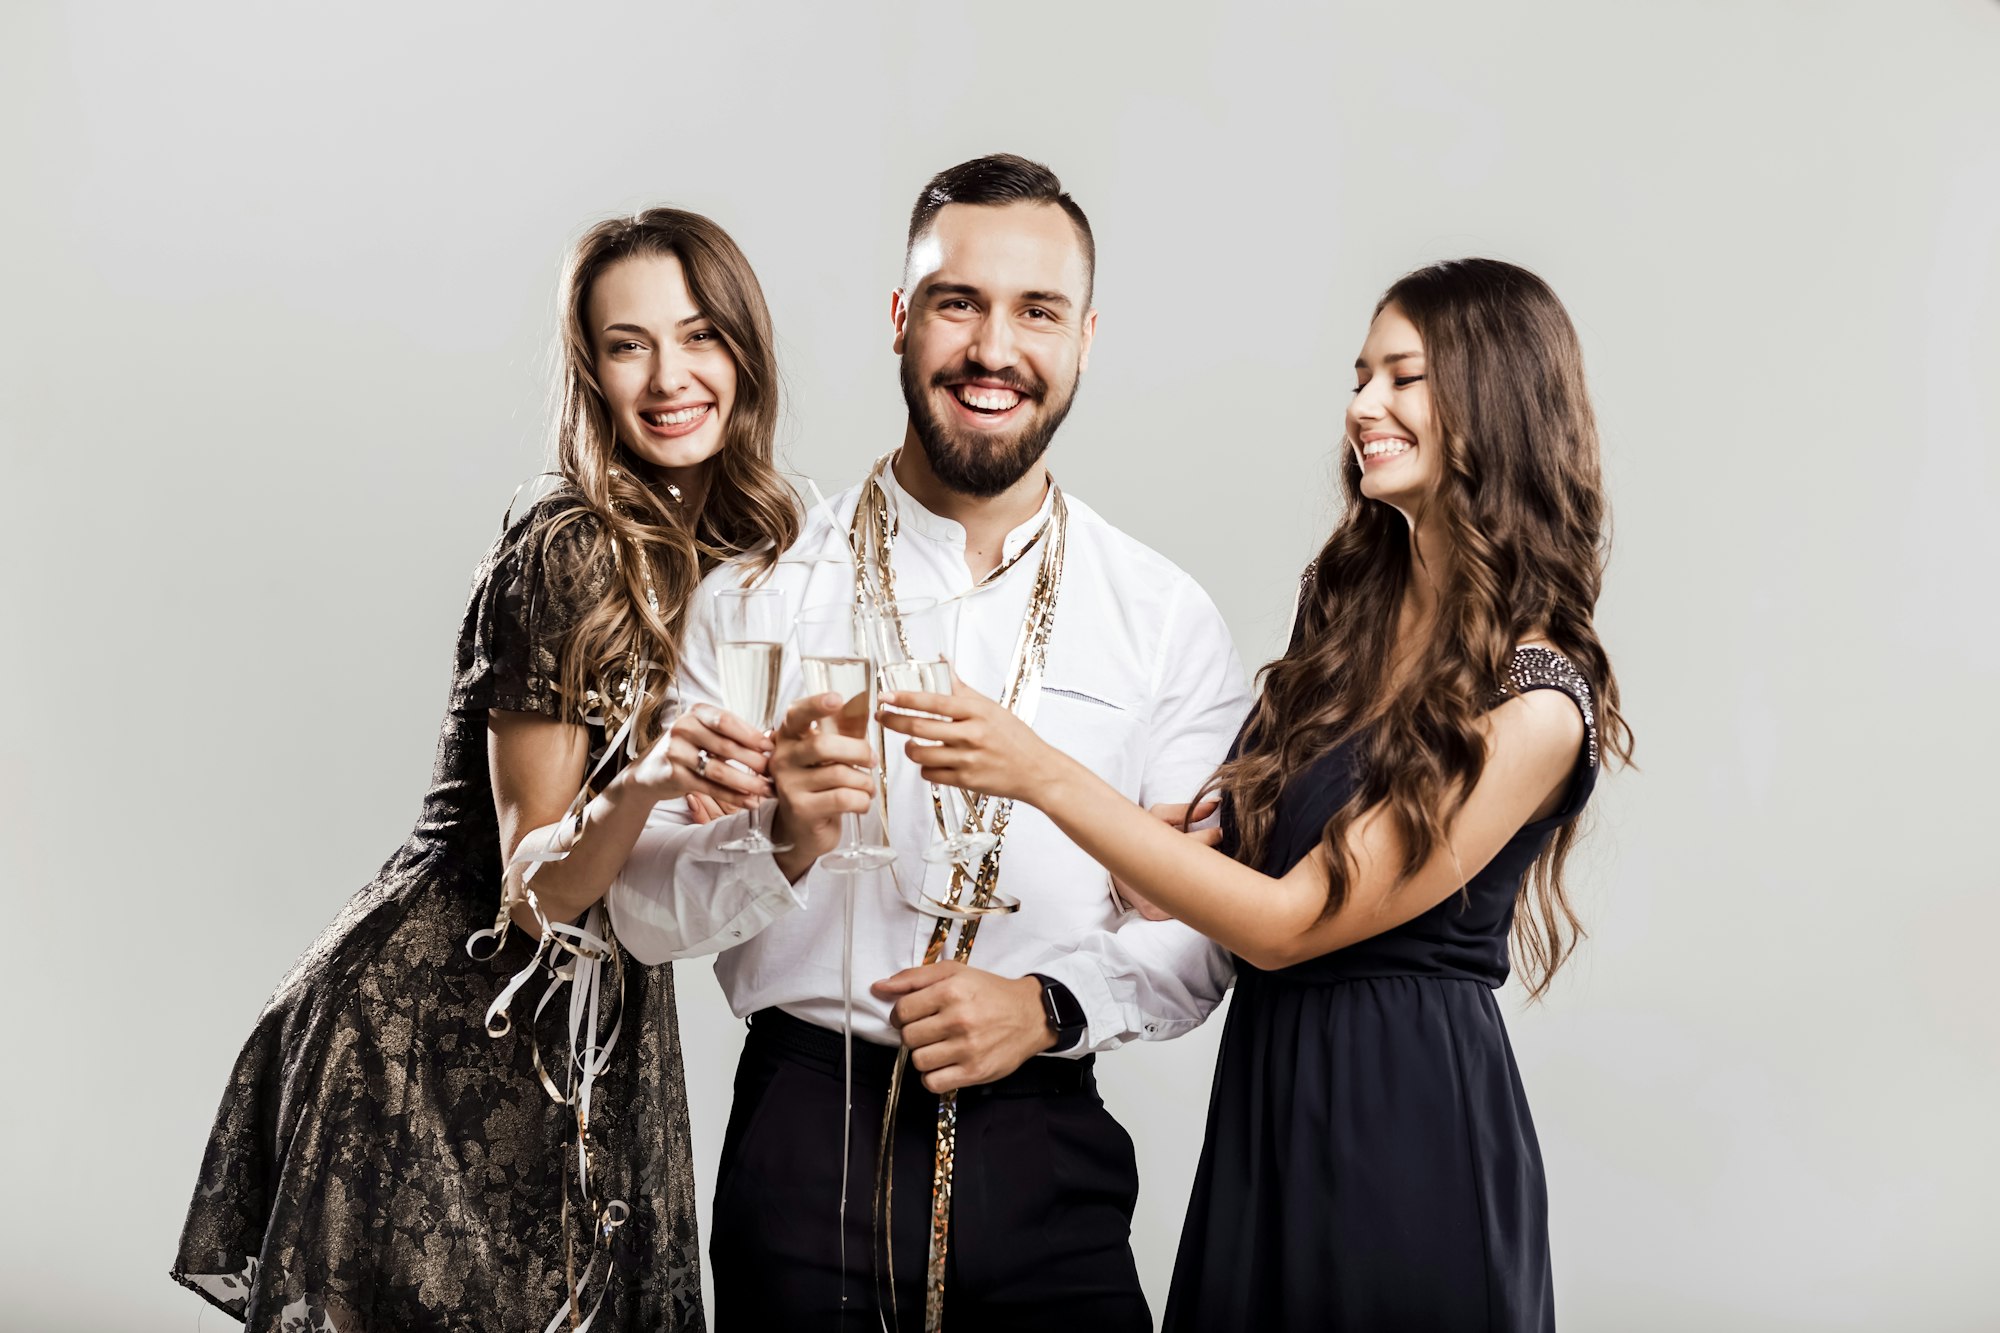 Party time. Two beautiful girls dressed in elegant dresses and handsome man in the white shirt hold